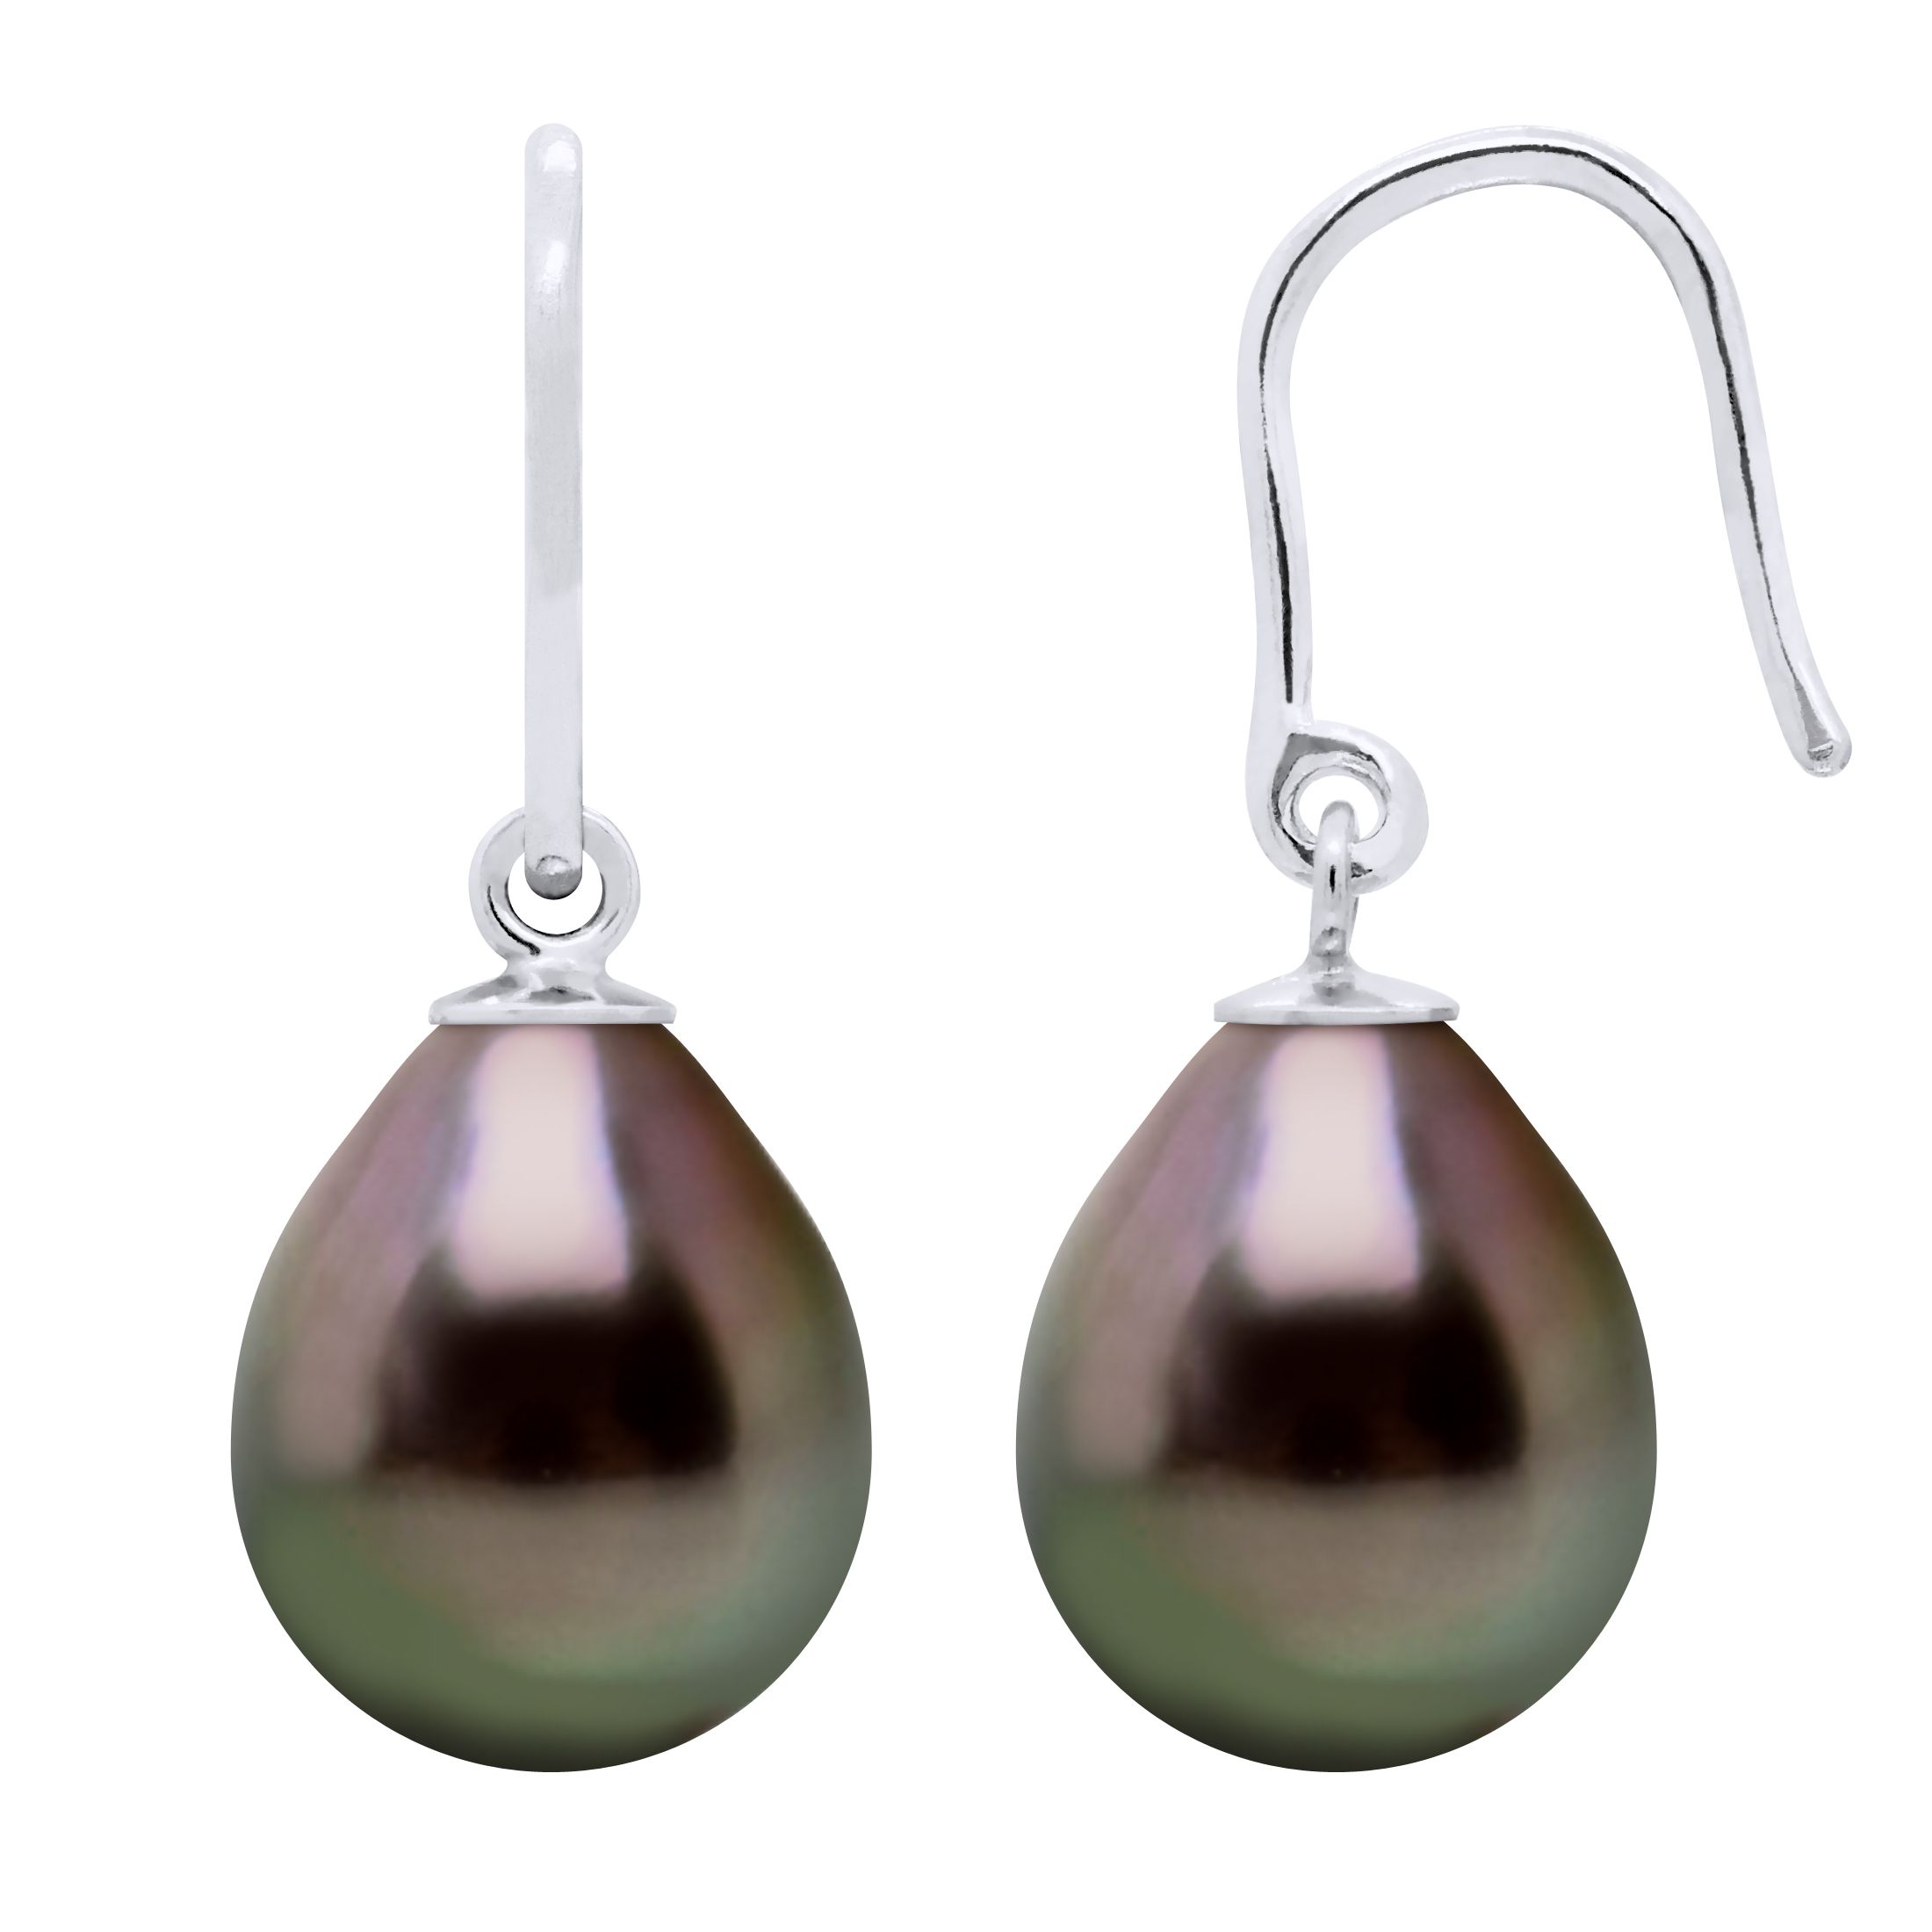 Earrings of 925 Sterling Silver and true Cultured Tahitian Pearl Pear Shape 9-10 mm - Hook system - Our jewellery is made in France and will be delivered in a gift box accompanied by a Certificate of Authenticity and International Warranty